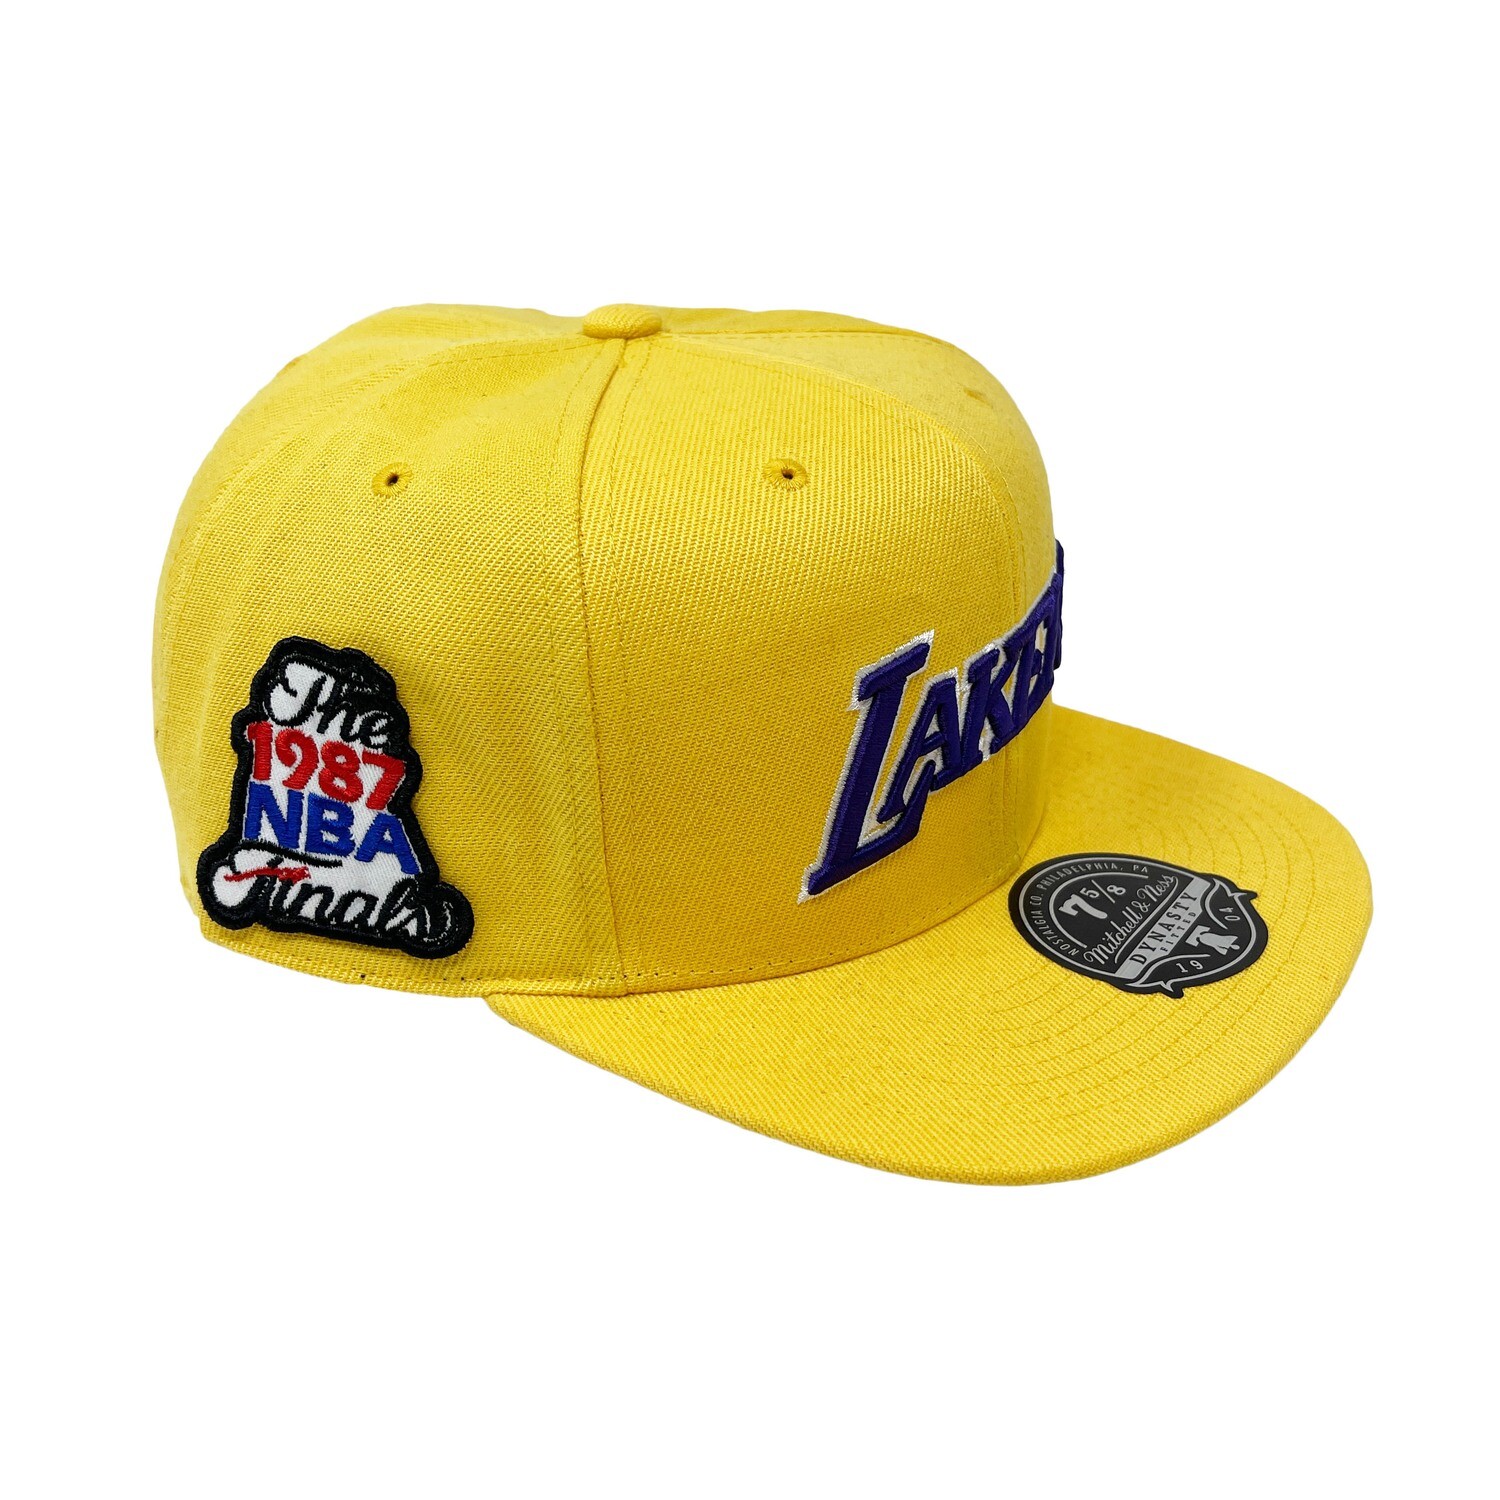 Los Angeles Lakers Men's Mitchell & Ness Fitted Hat